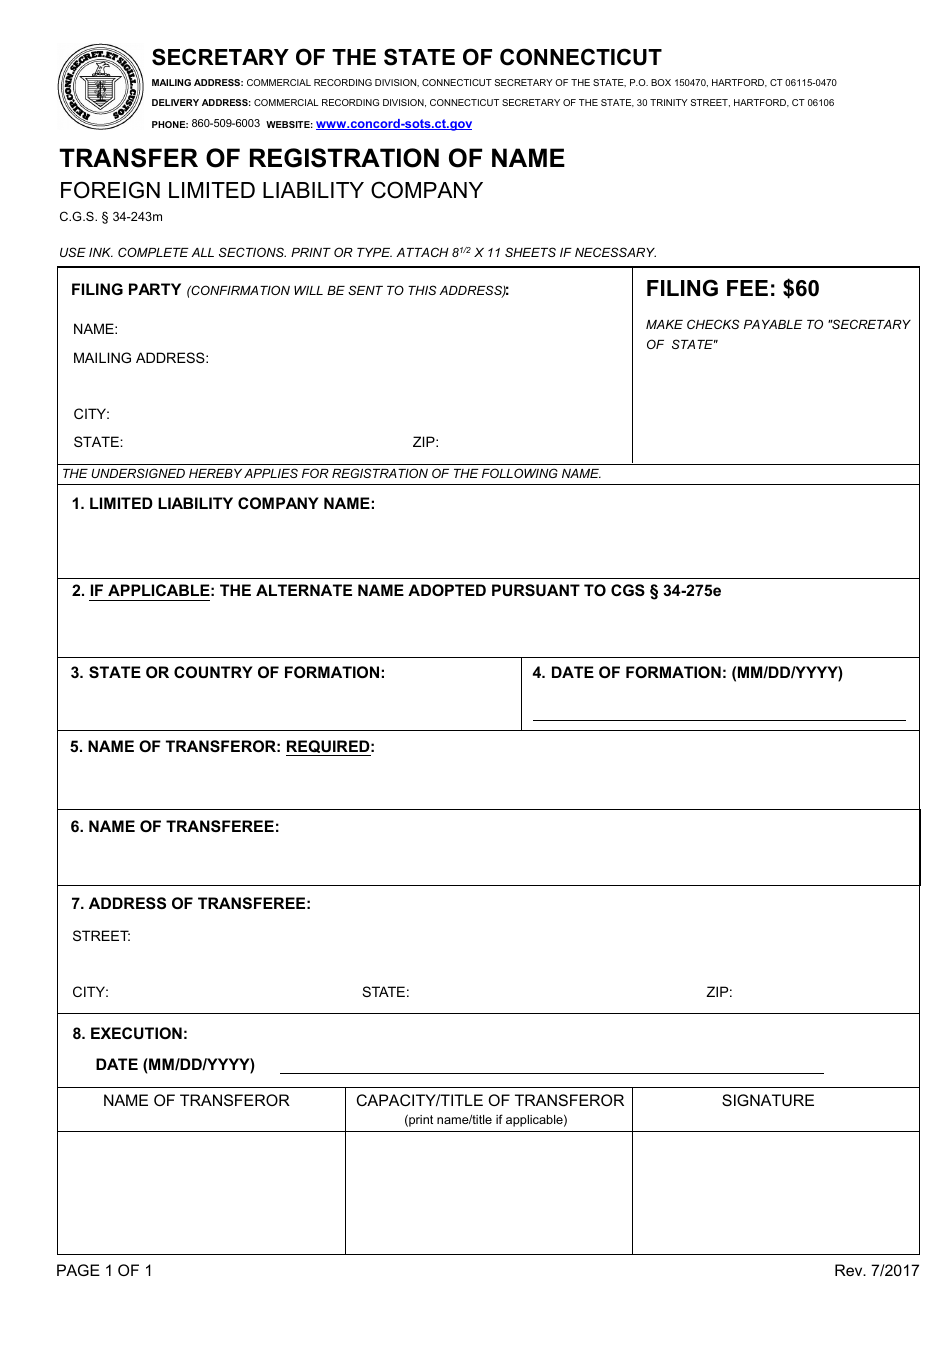 Transfer of Registration of Name - Foreign Limited Liability Company - Connecticut, Page 1